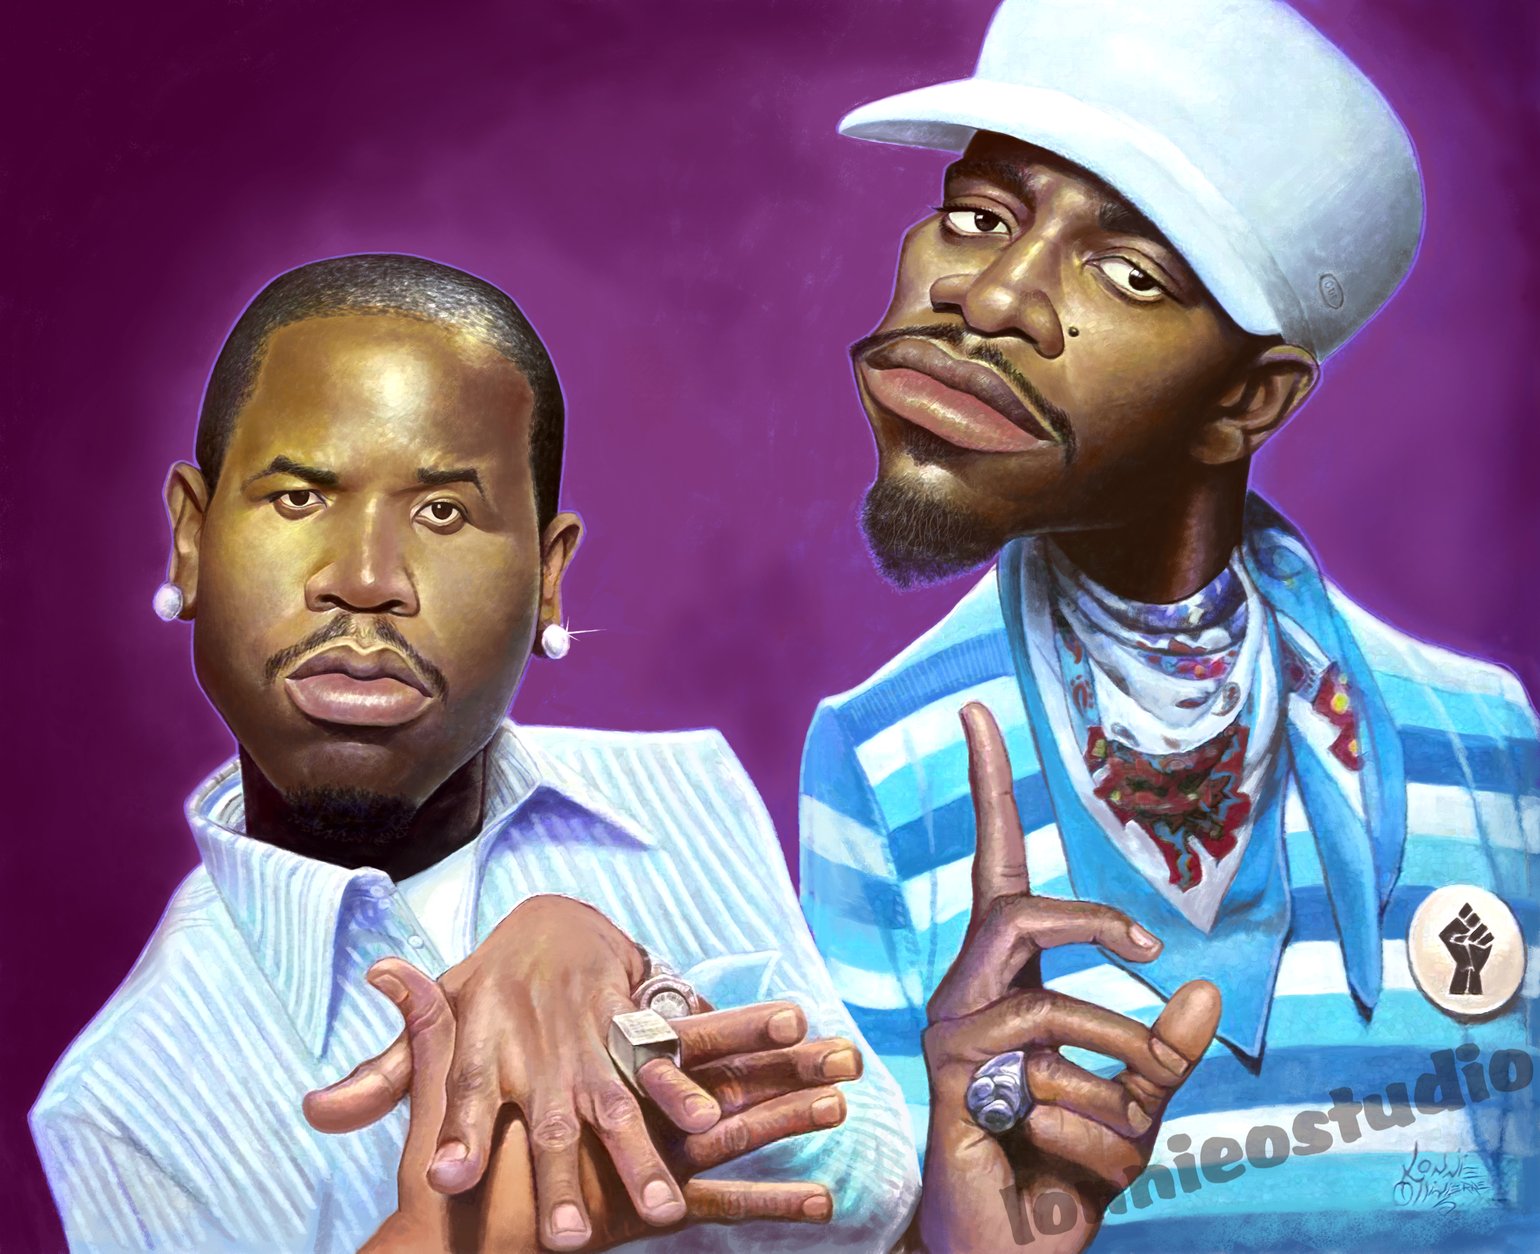 Image of "OUTKAST"